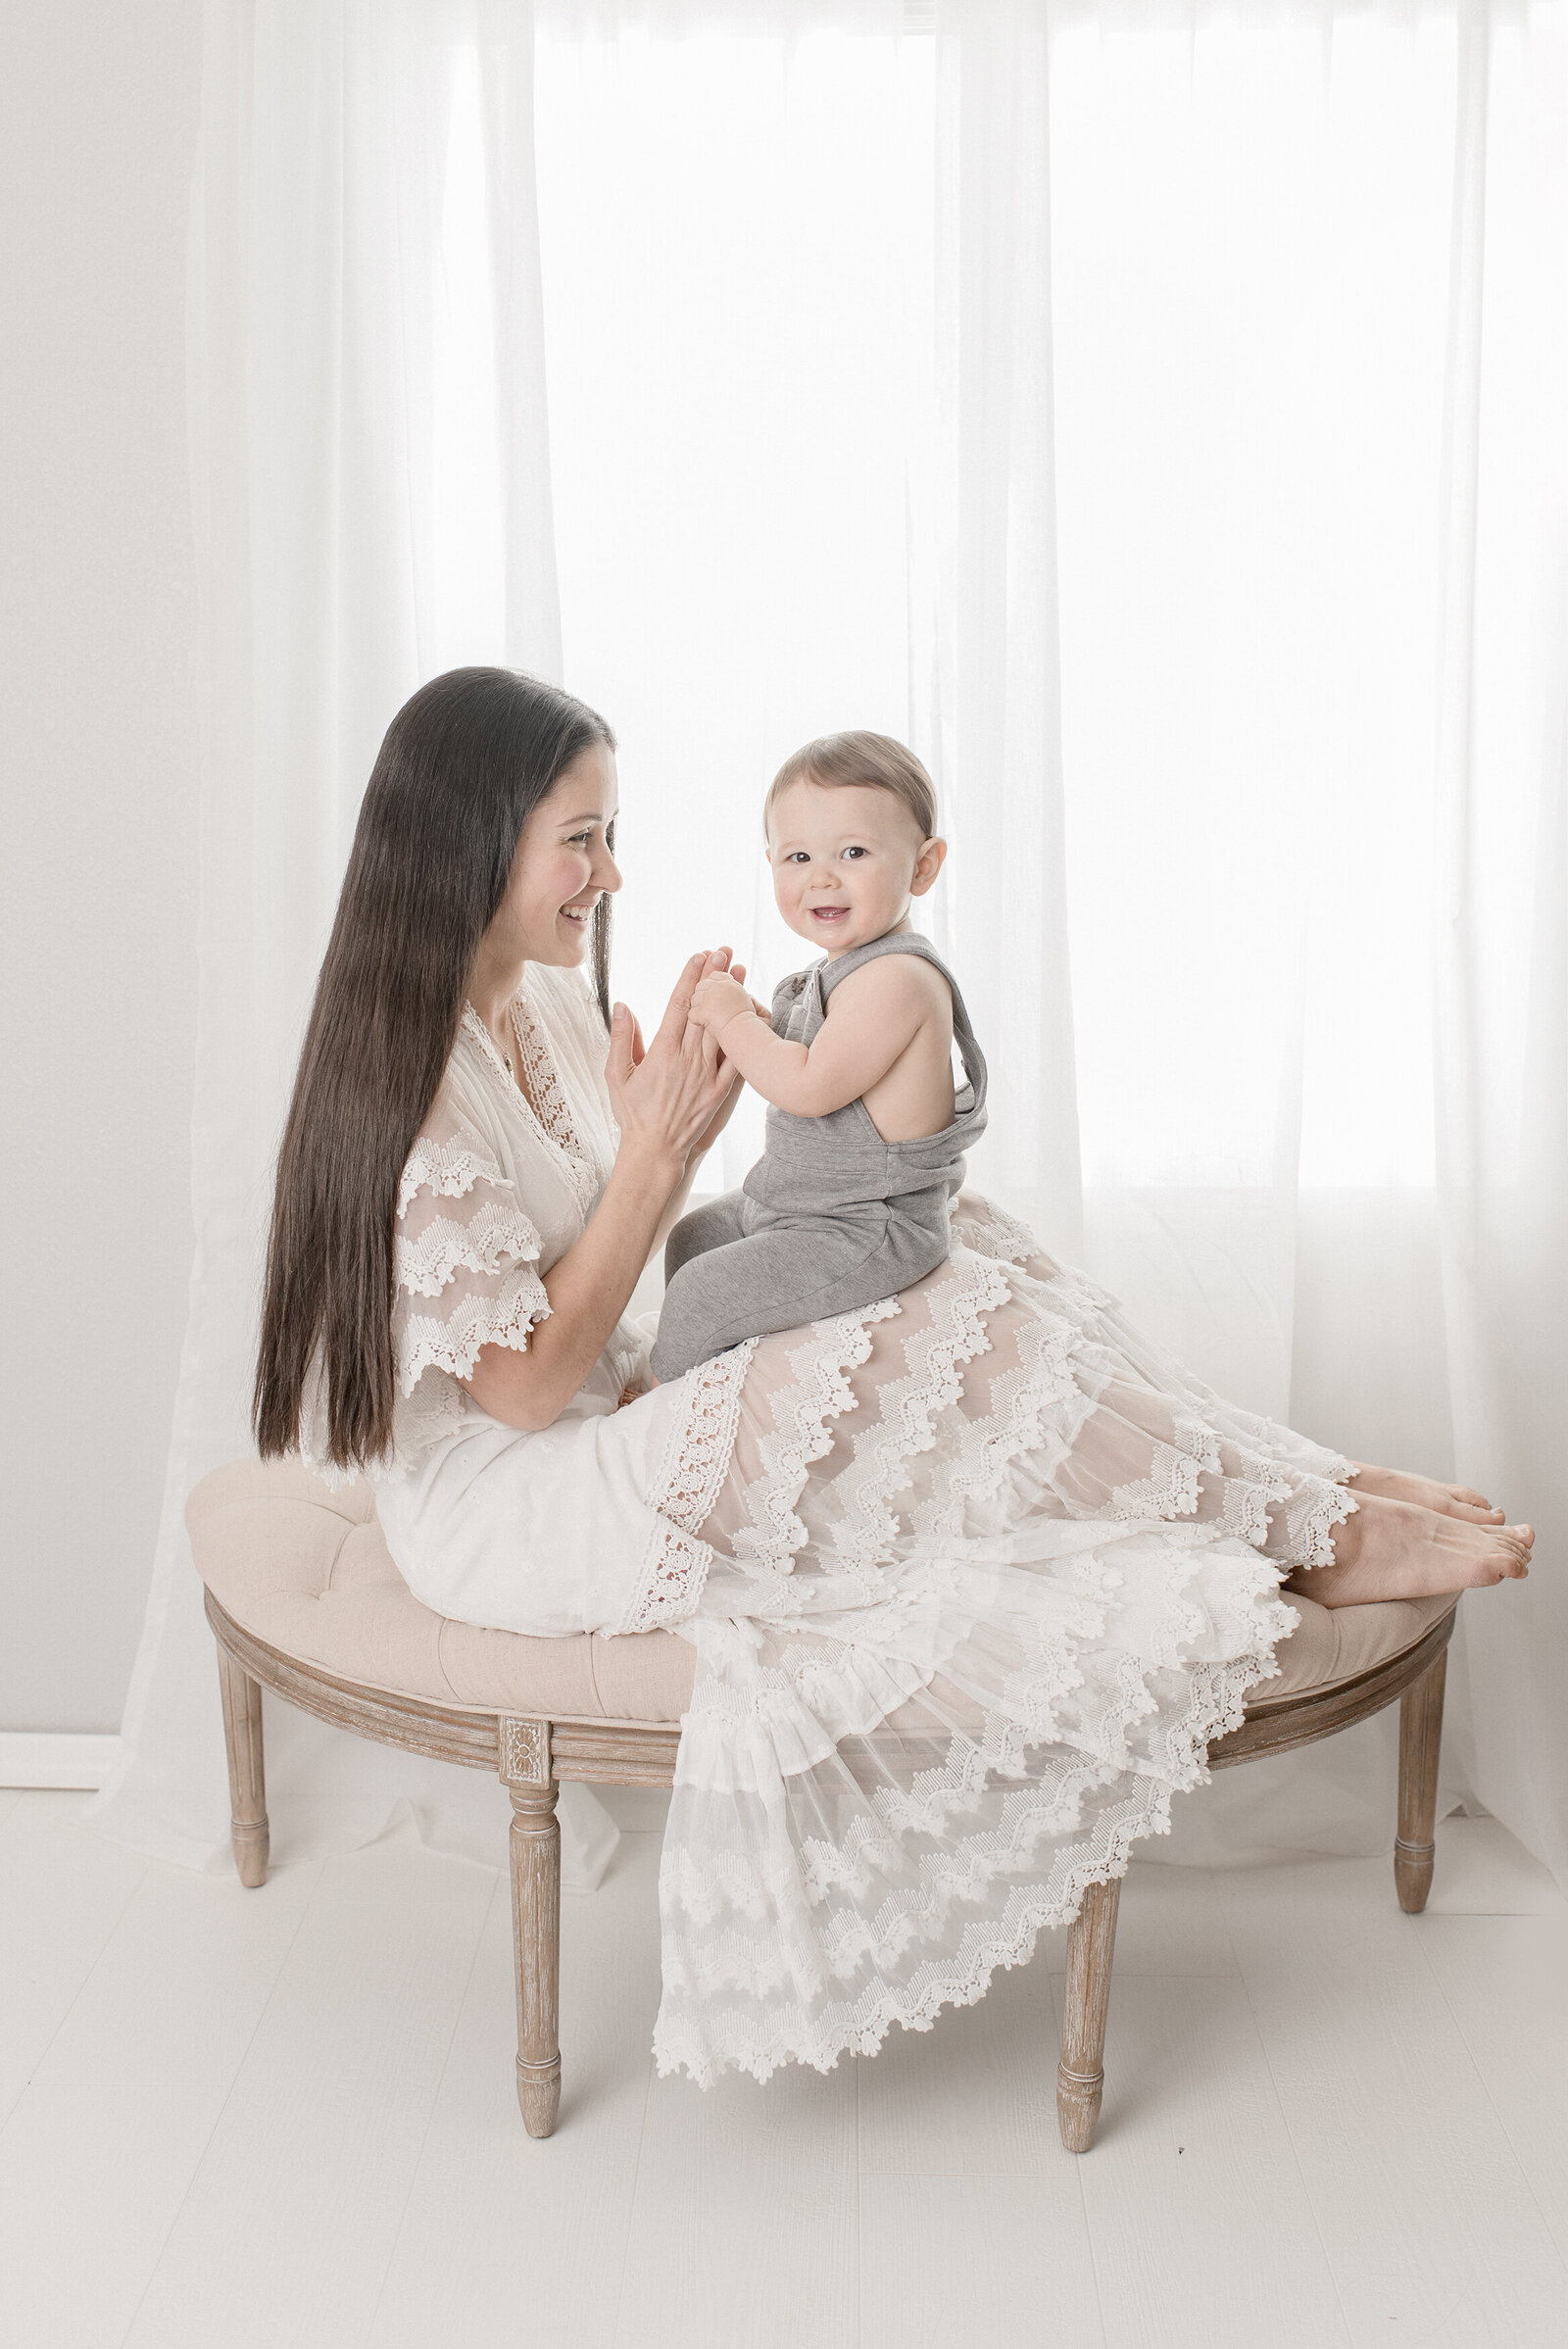 Woman in lace dress holding one year old in lap smiling